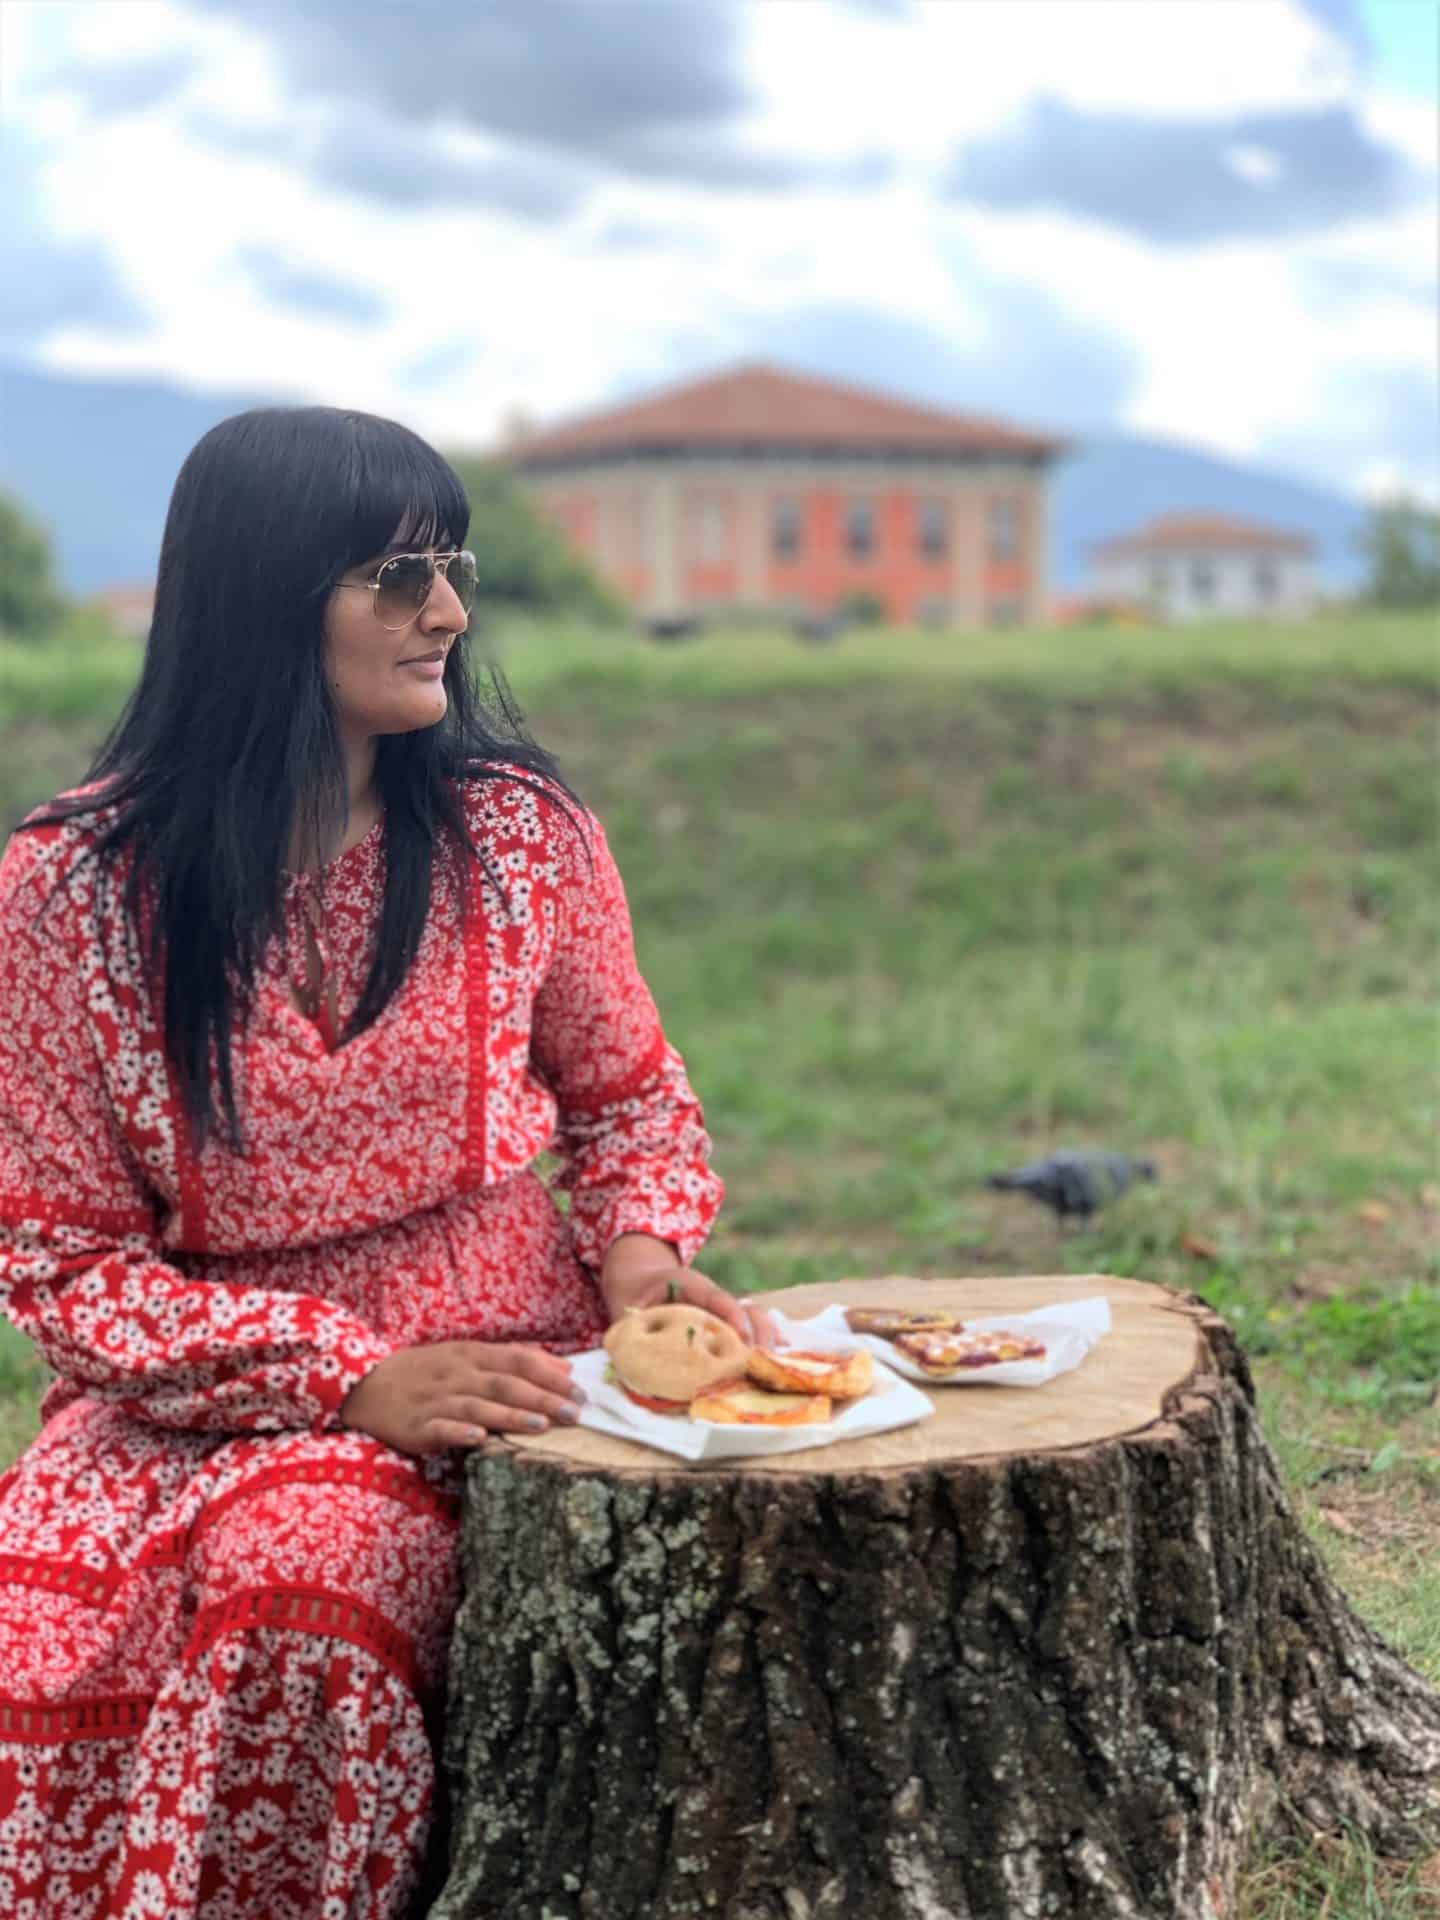 Bejal having picnic lunch in Lucca